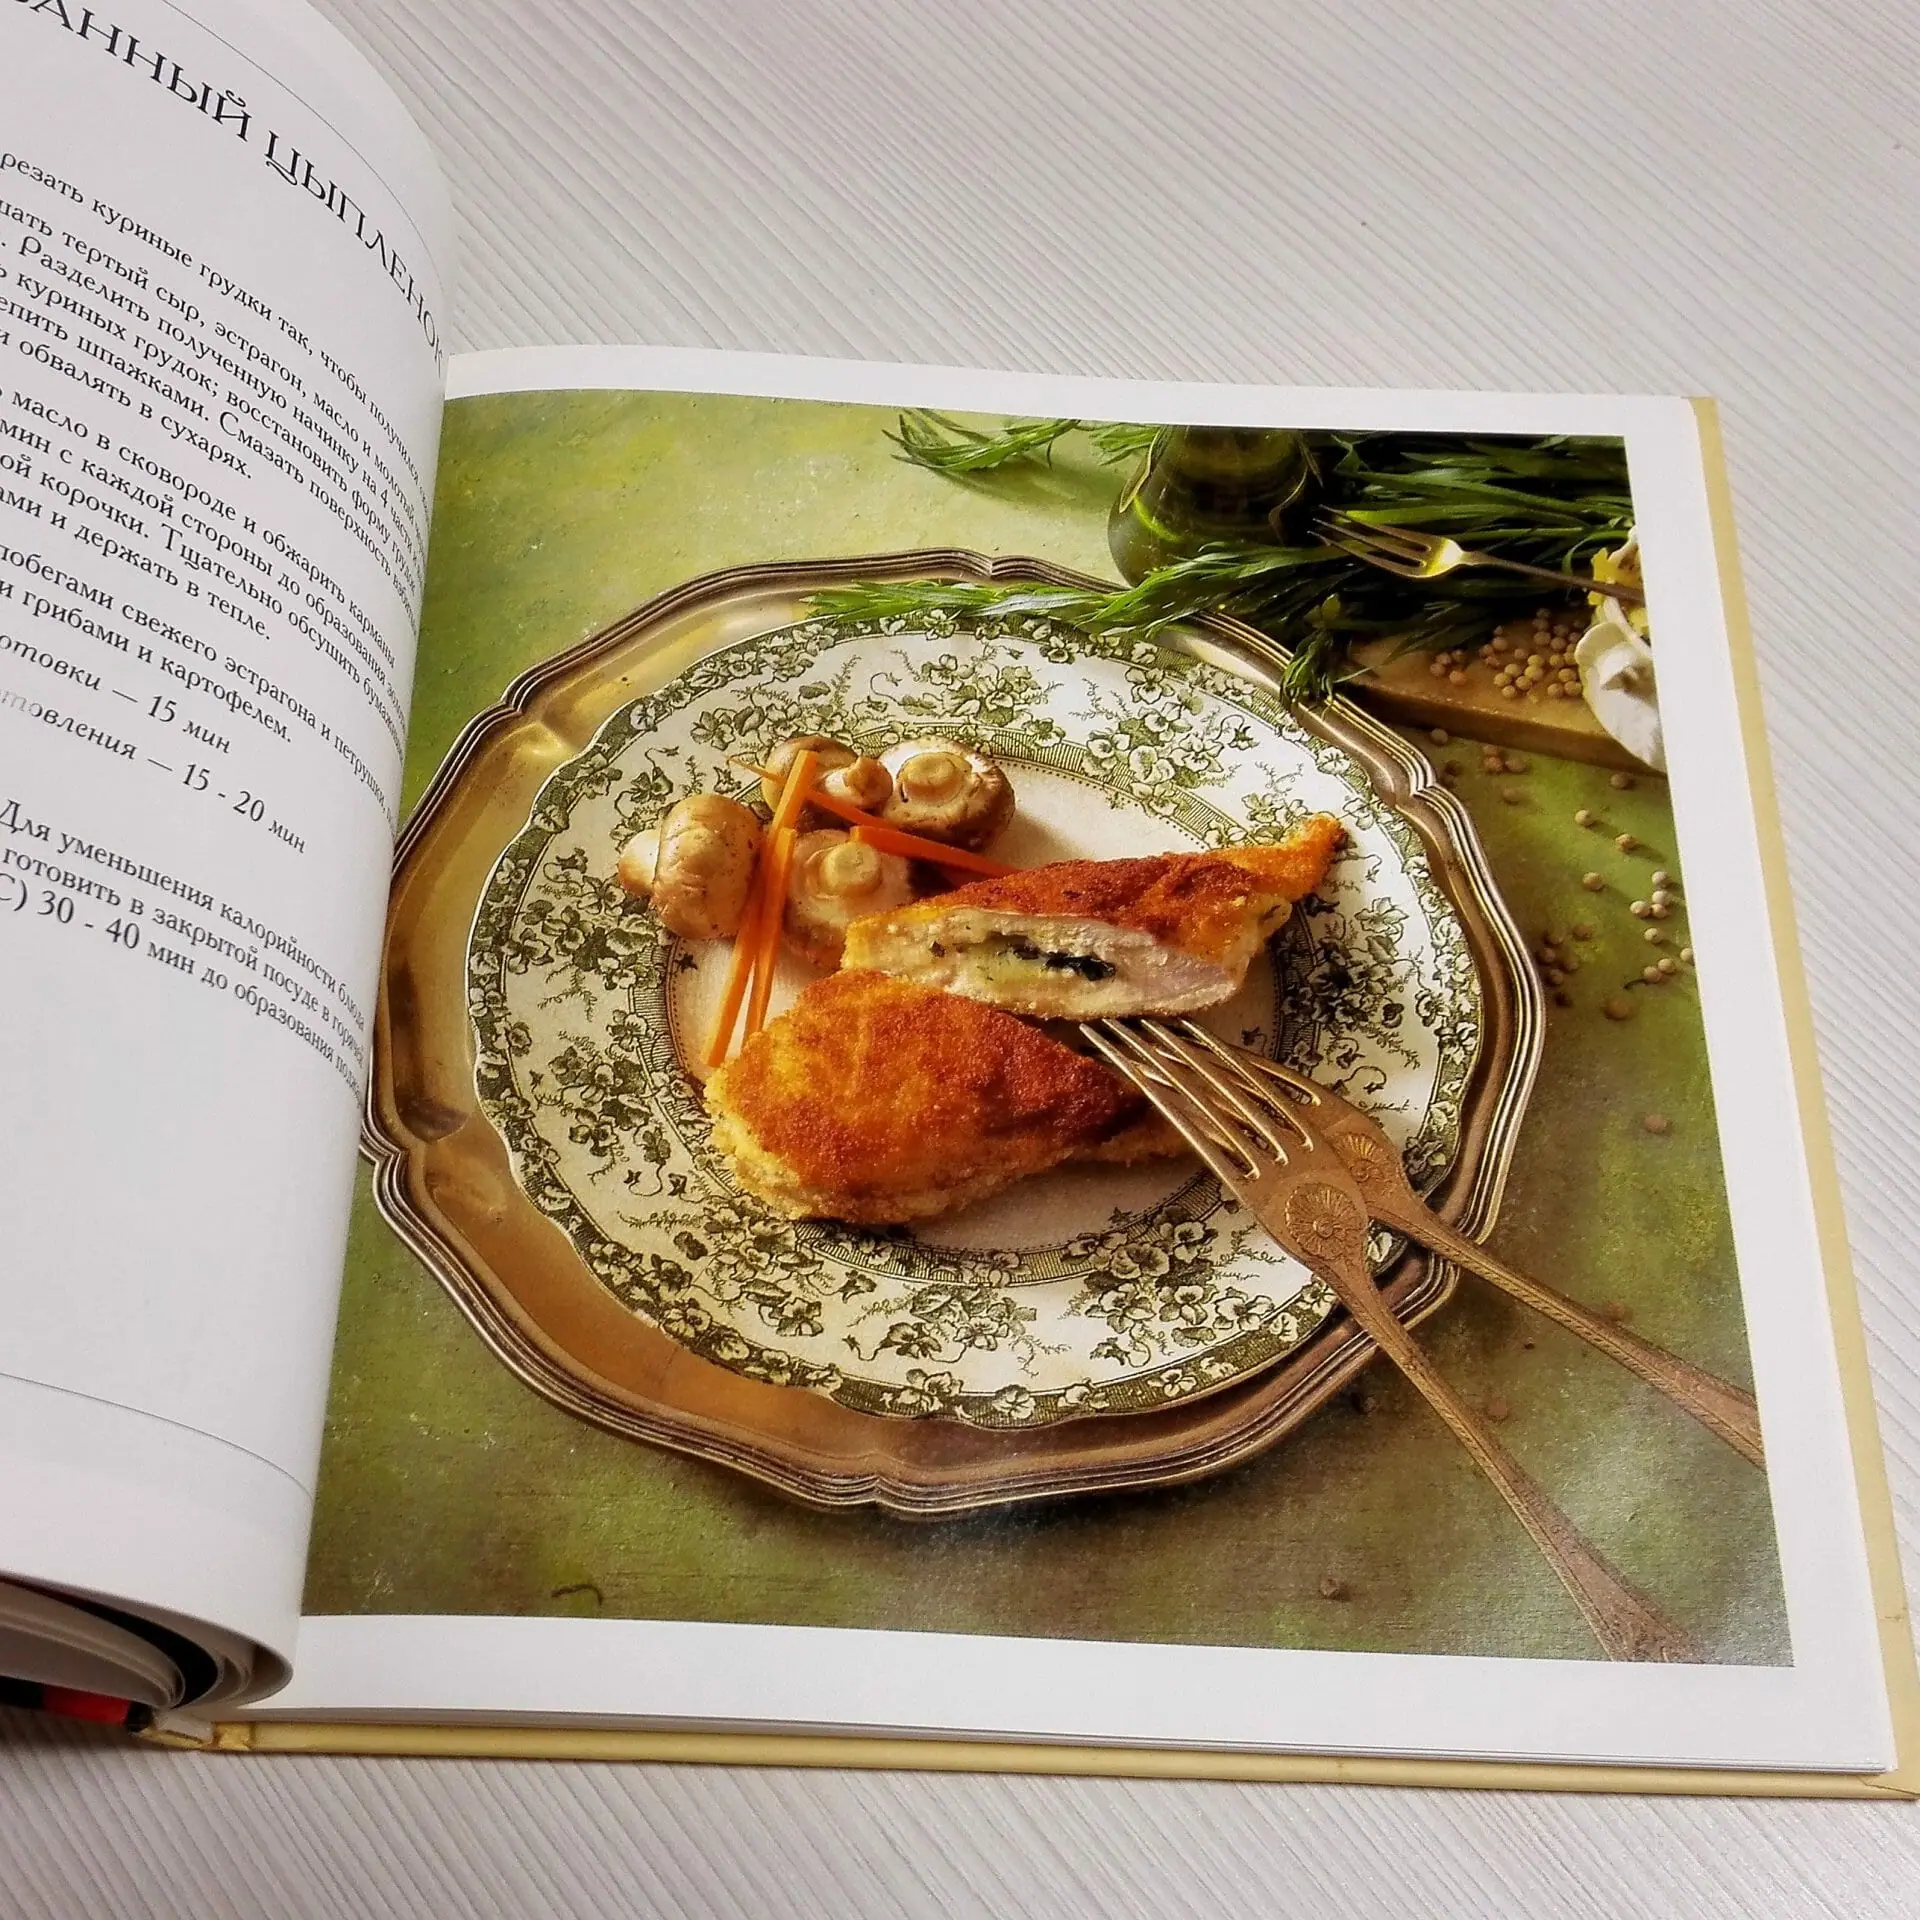 a book about russian cooking.jpg